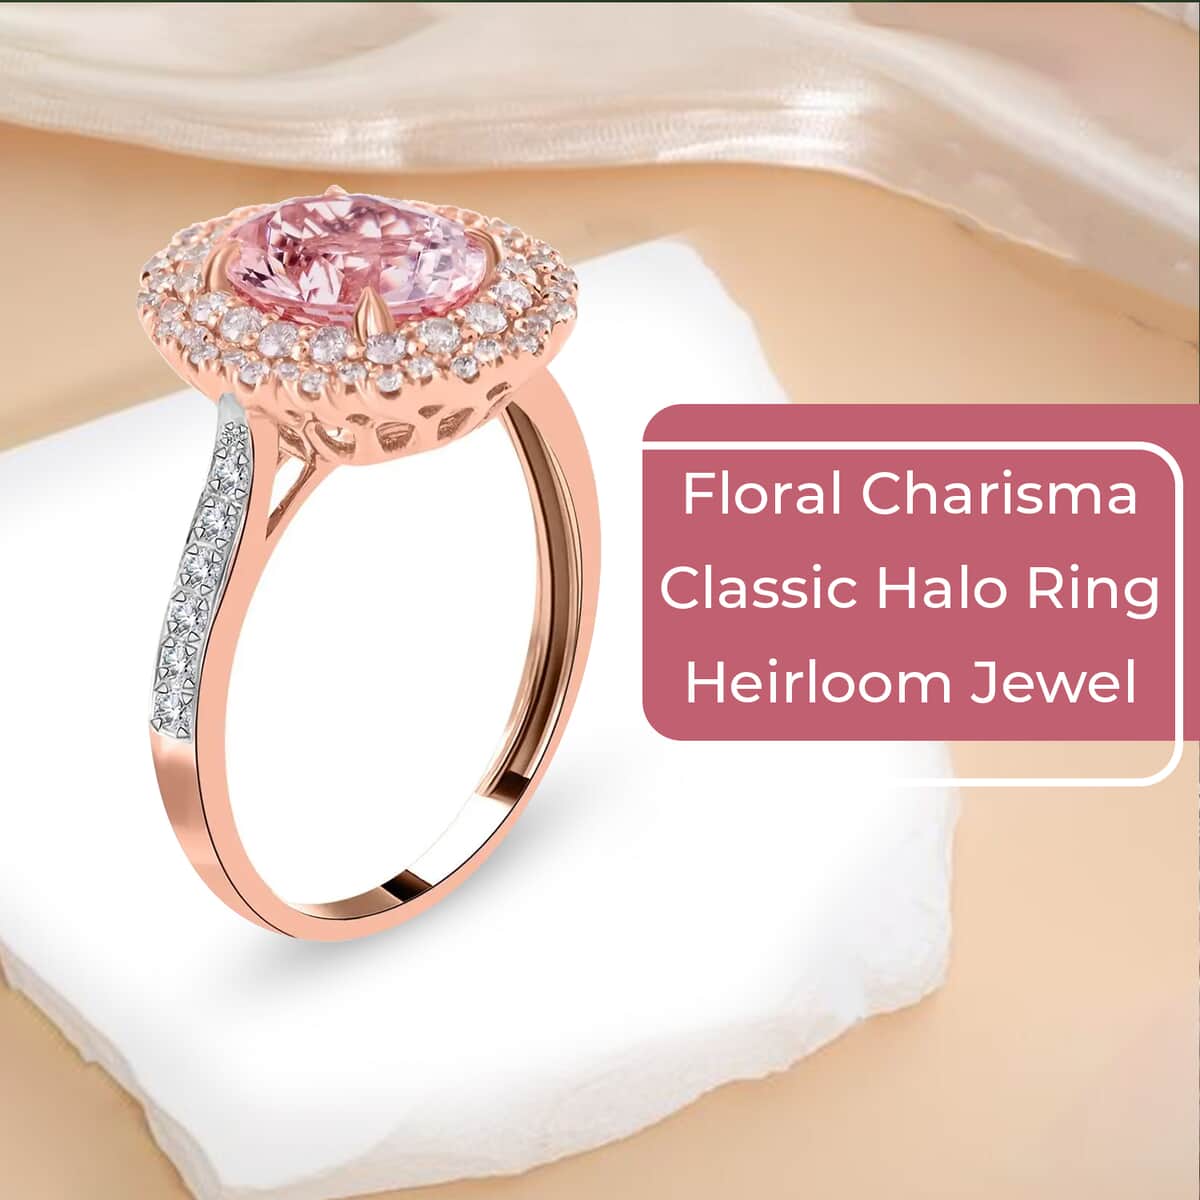 Ankur Treasure Chest Modani Marropino Morganite Ring, 14K Rose Gold Ring, Diamond Floral Halo Ring, Natural Pink And White Diamond Accent Ring 1.95 ctw (Size 8.0) image number 3